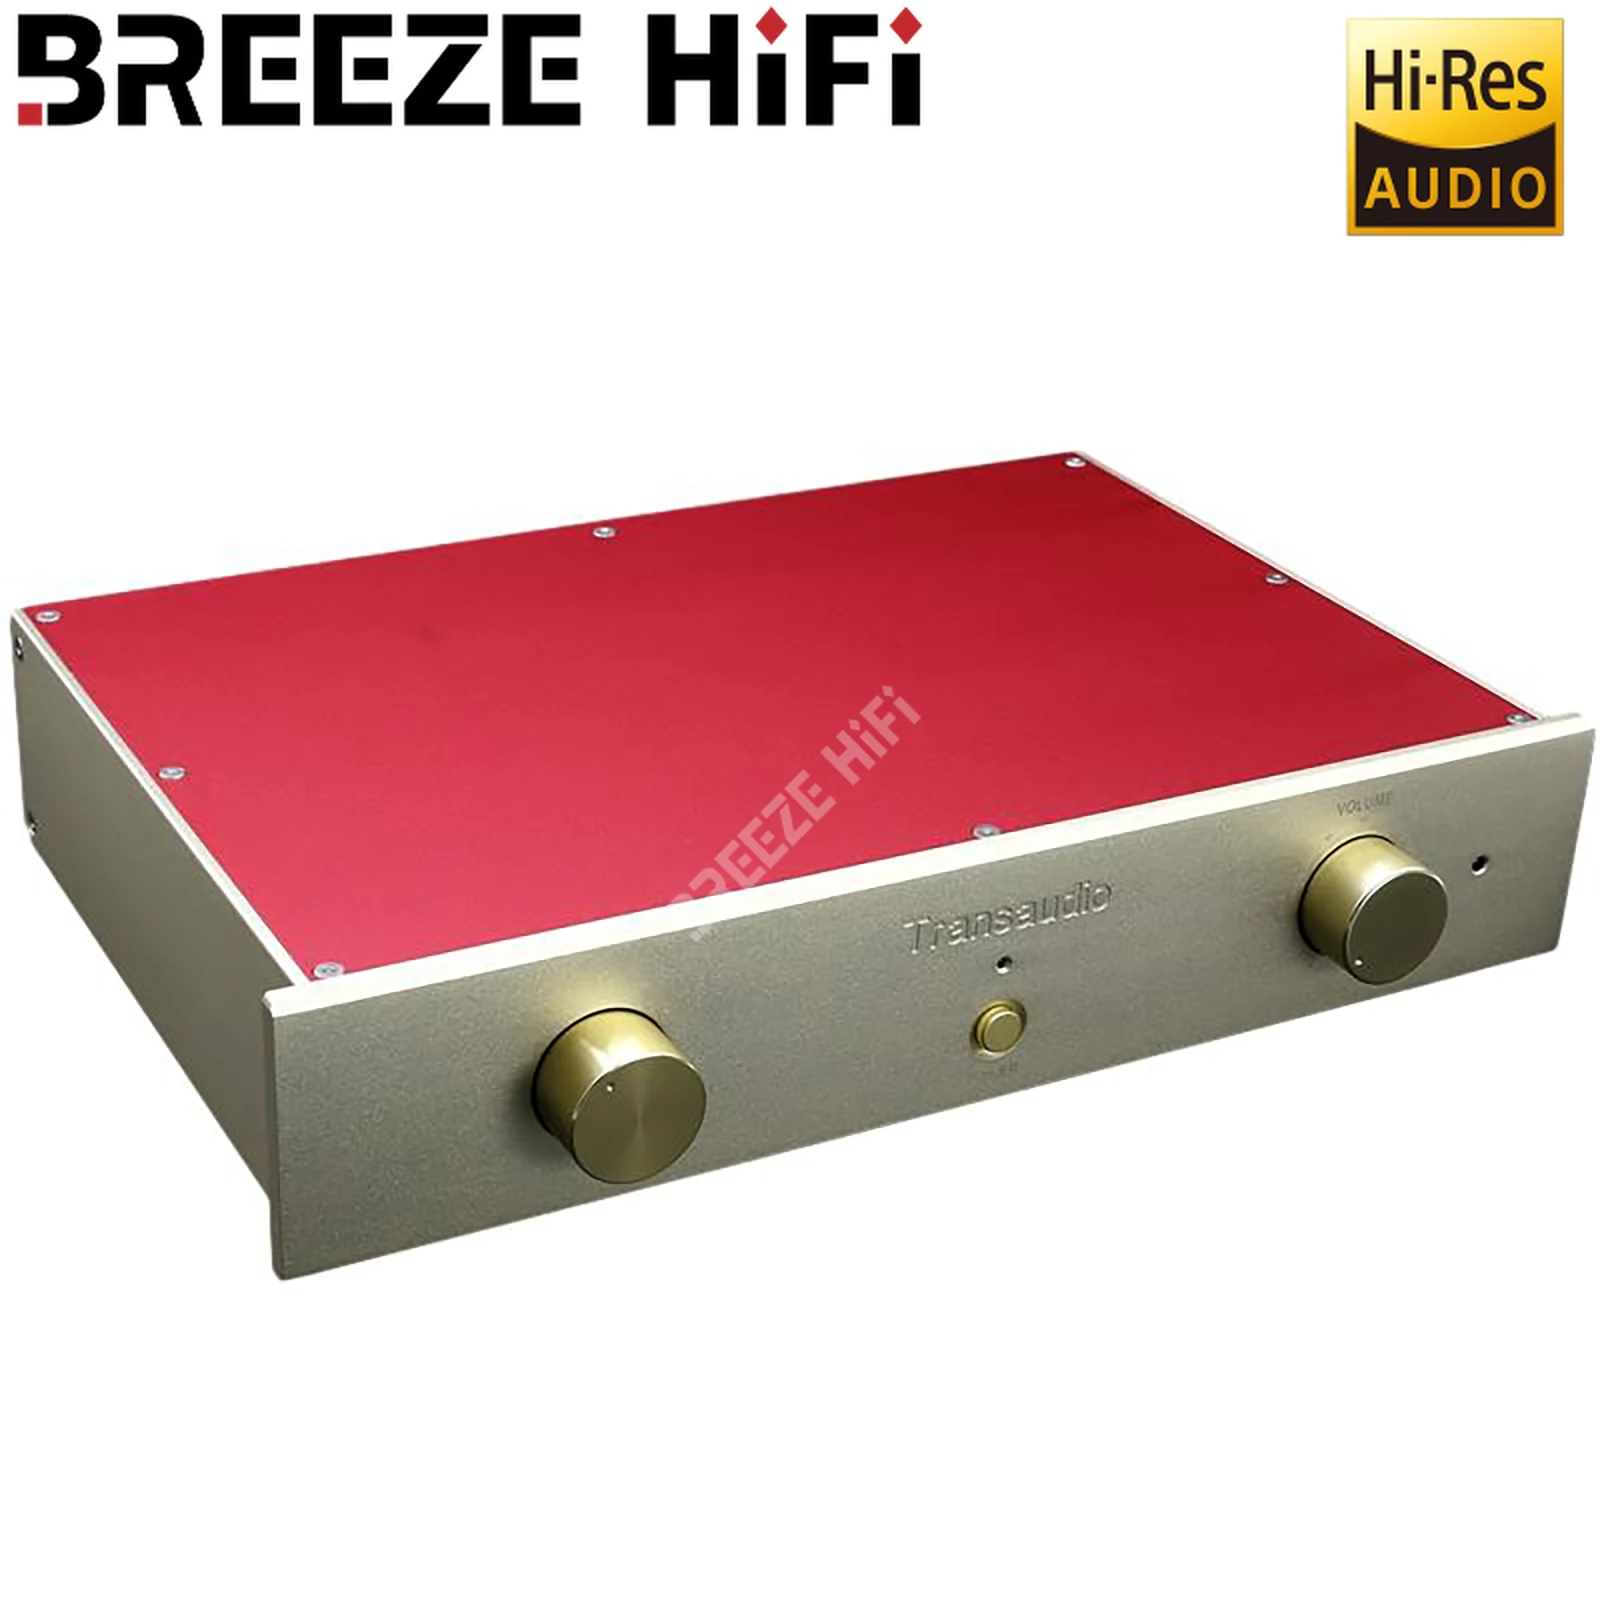 

BREEZE HIFI MASTER MMG 52 Single-ended Class A Line Starter Grade C5PRO Home Theater Factory Direct